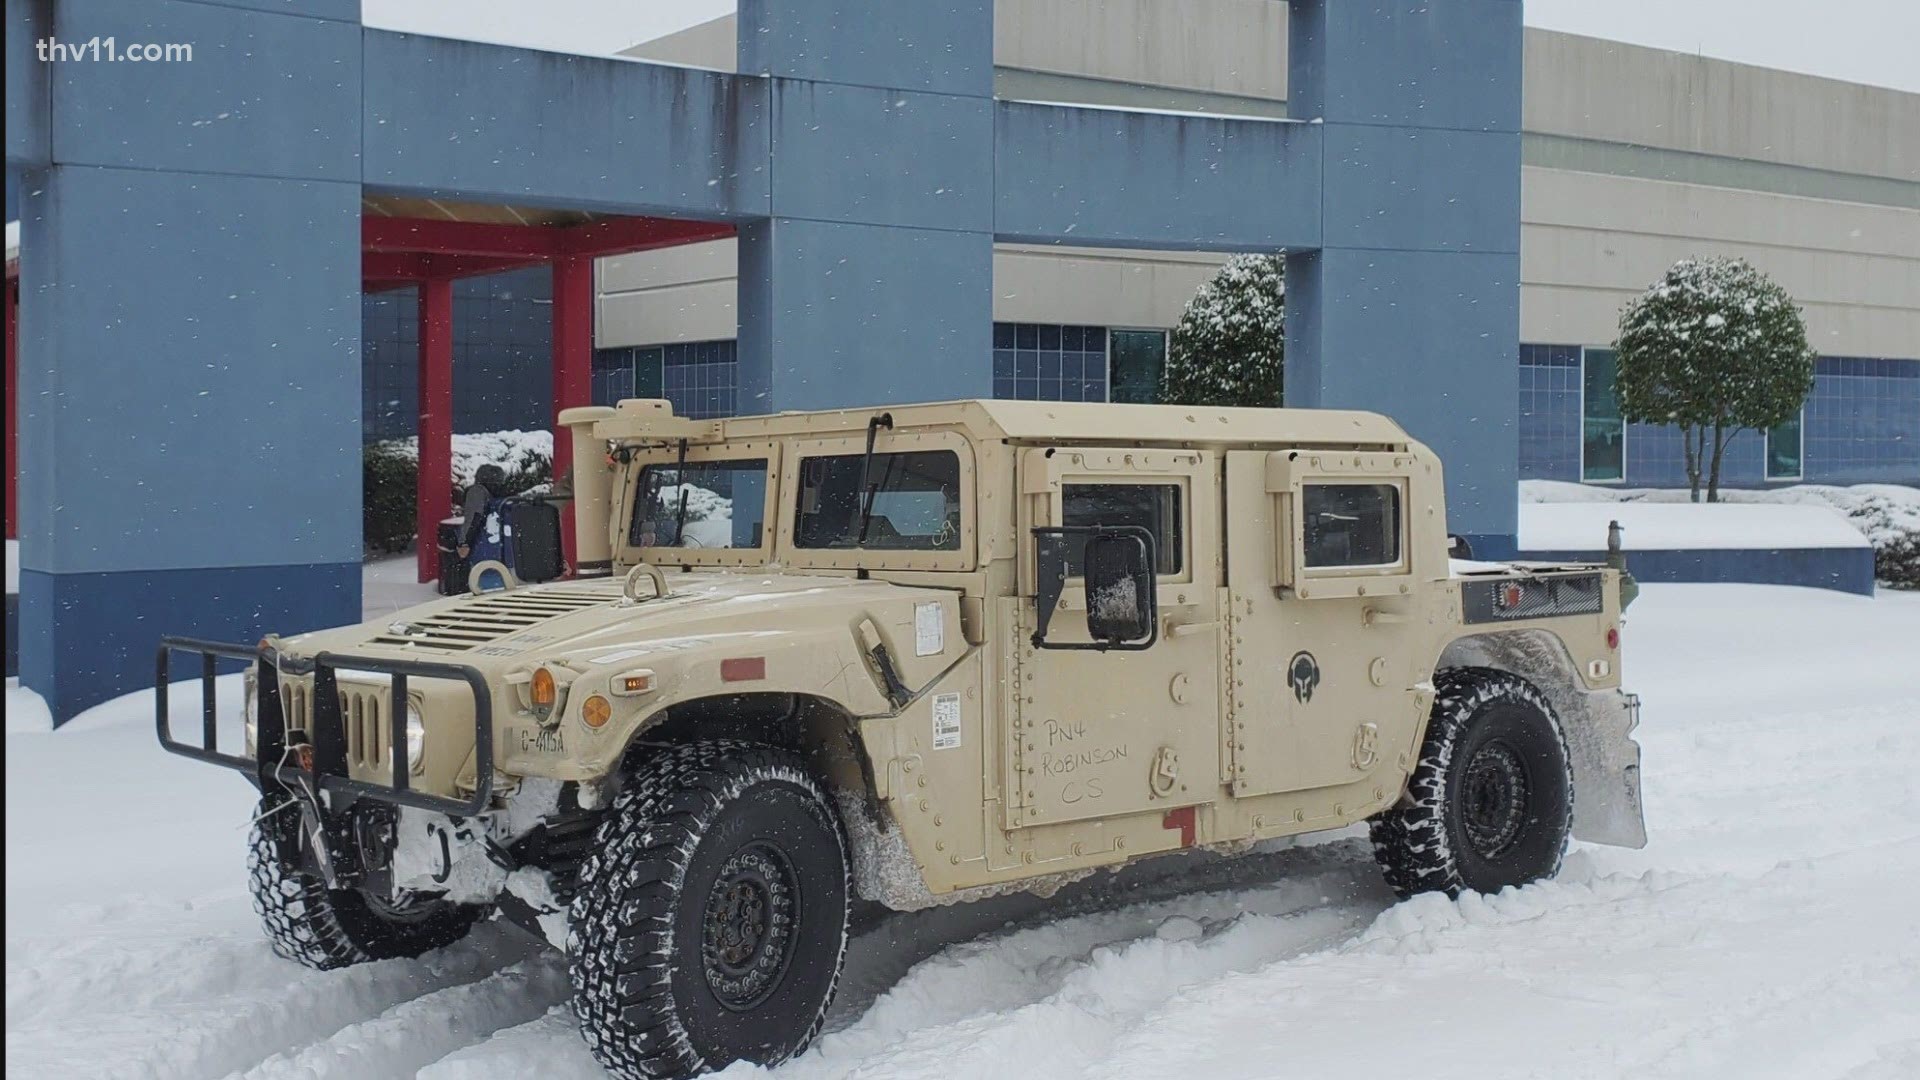 You know it's a serious snowstorm when the Arkansas National Guard is out helping the public with their emergencies.